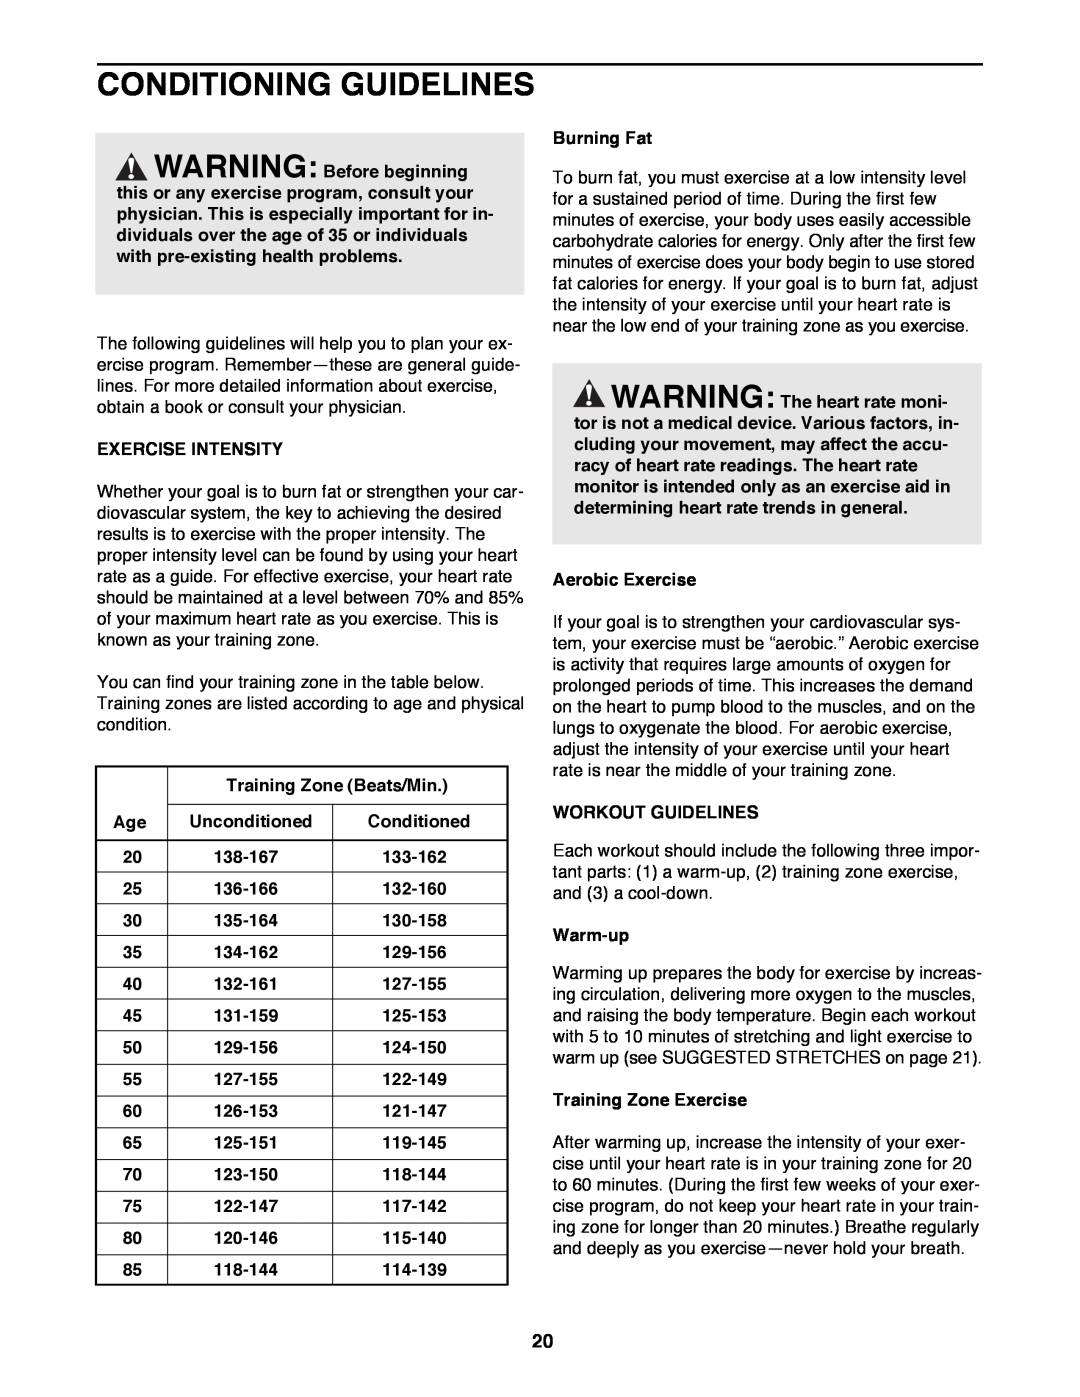 Image 831.297572 Conditioning Guidelines, Exercise Intensity, Training Zone Beats/Min, Unconditioned, Conditioned, 138-167 